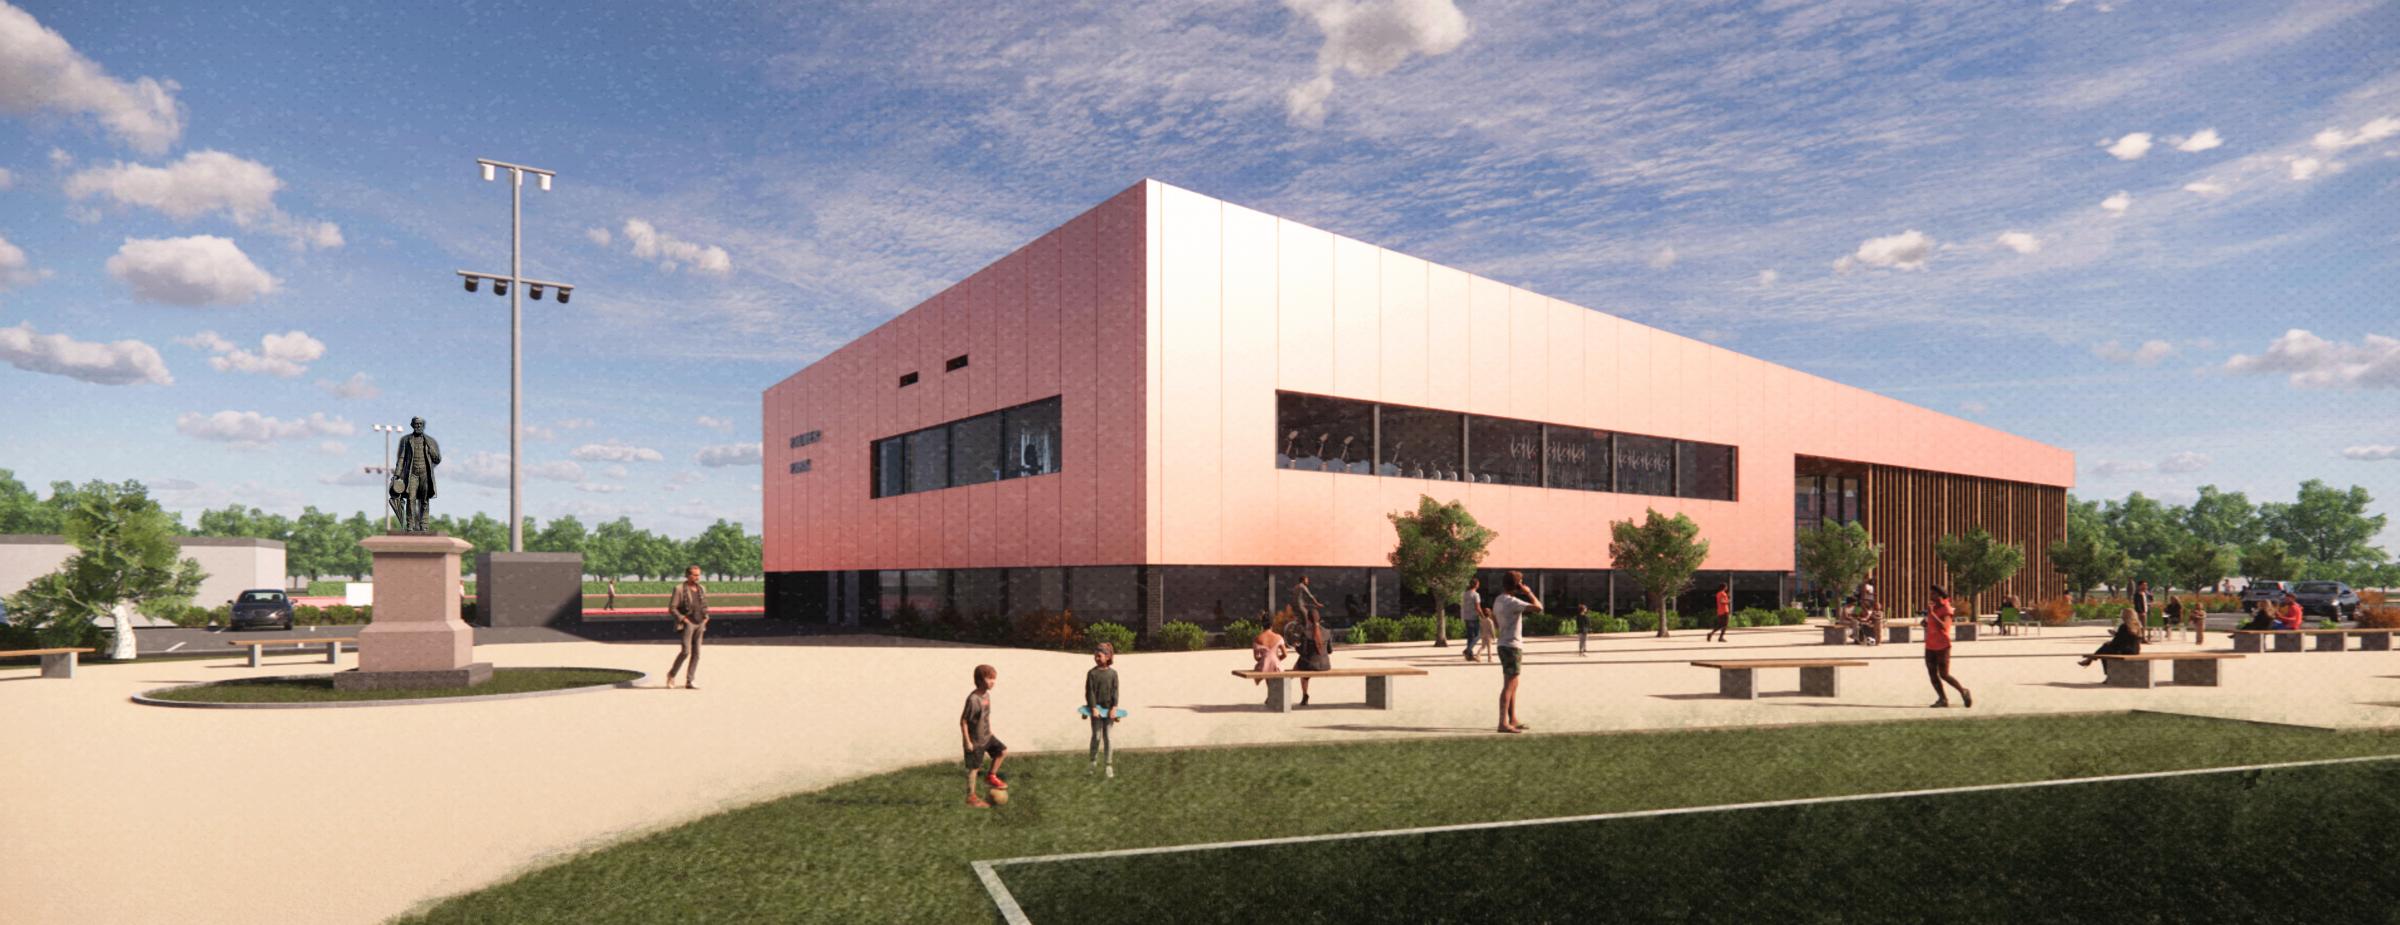 An artists impression of the new leisure centre at Palmer Park 